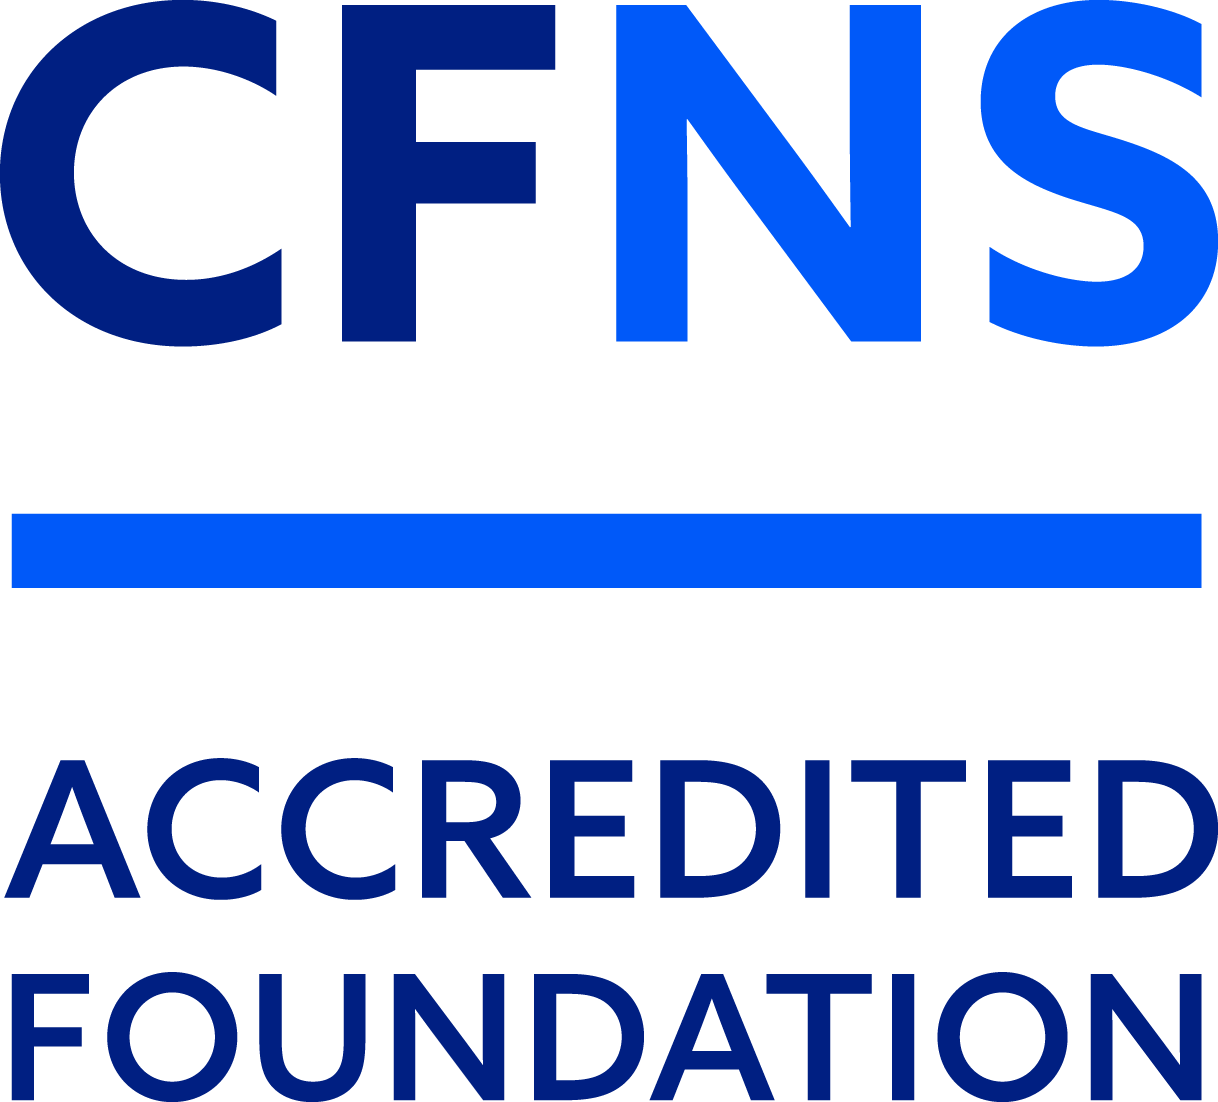 CFNS Accredited Foundation